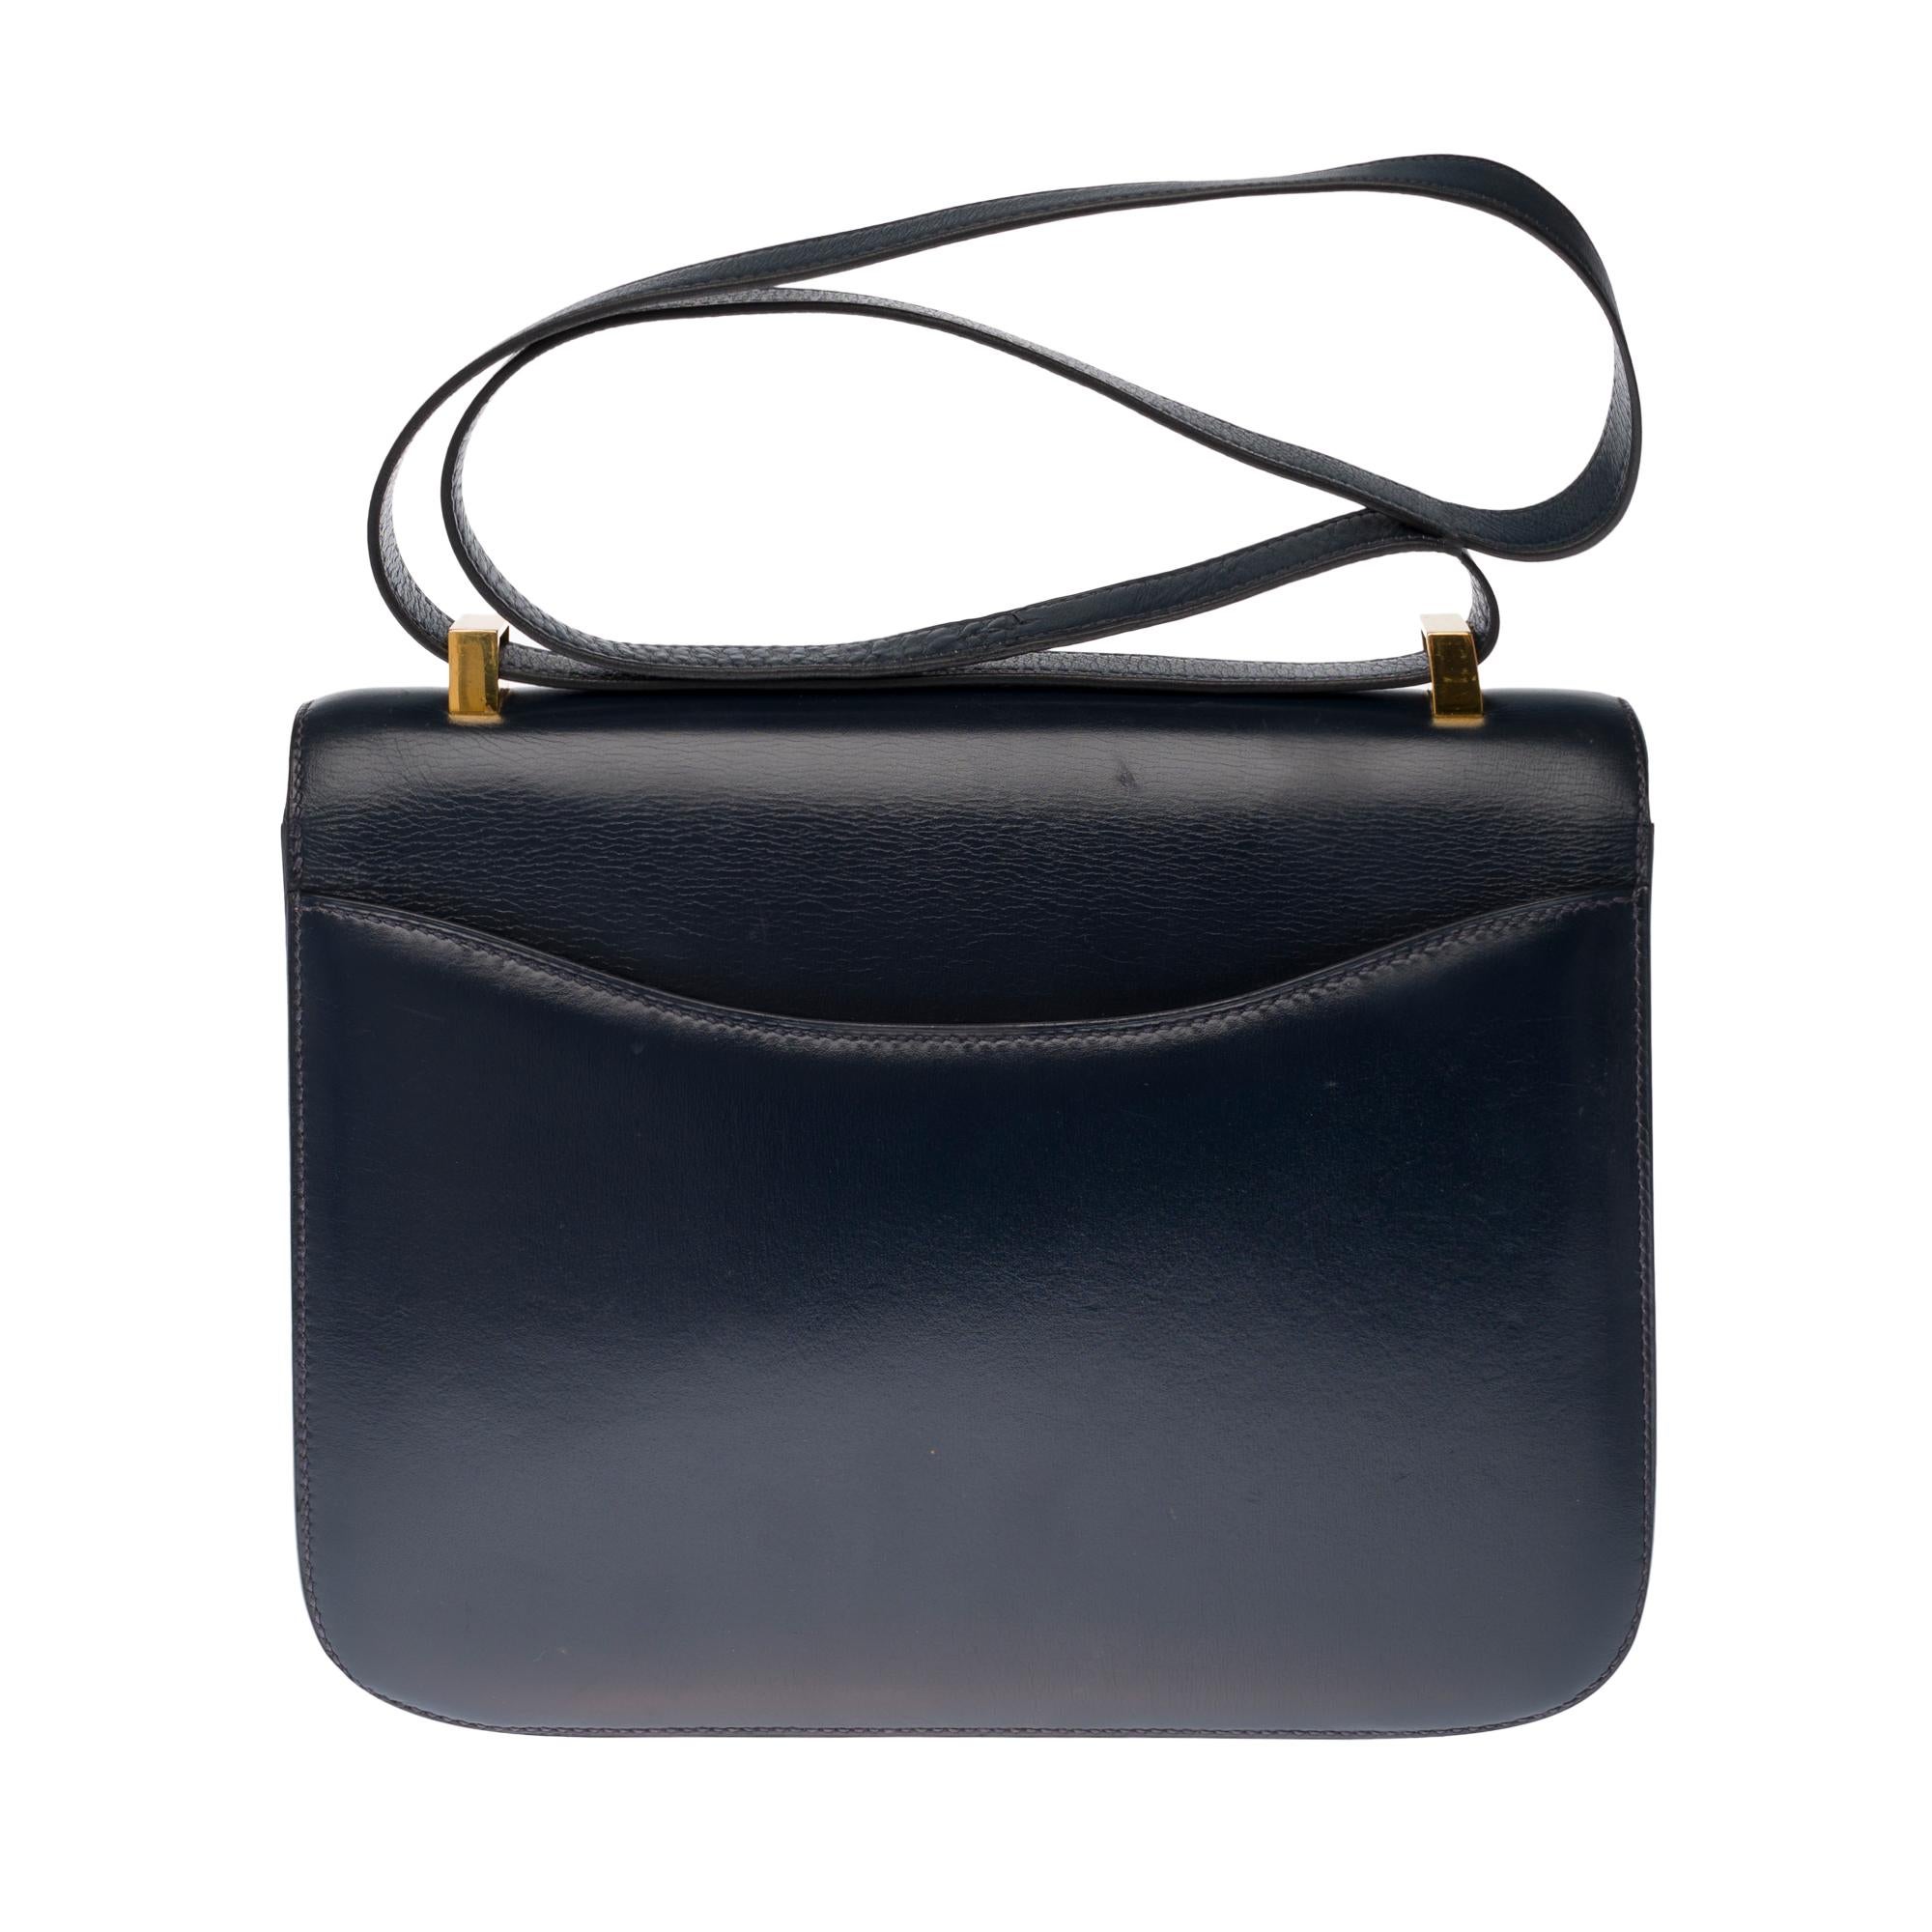 Splendid Hermes Constance 23 cm handbag in navy blue box, gold metal hardware, transformable handle in navy leather allowing a hand or shoulder.

Closure with H buckle on flap.
A patch pocket on the back of the bag.
Lining in navy leather, one zip